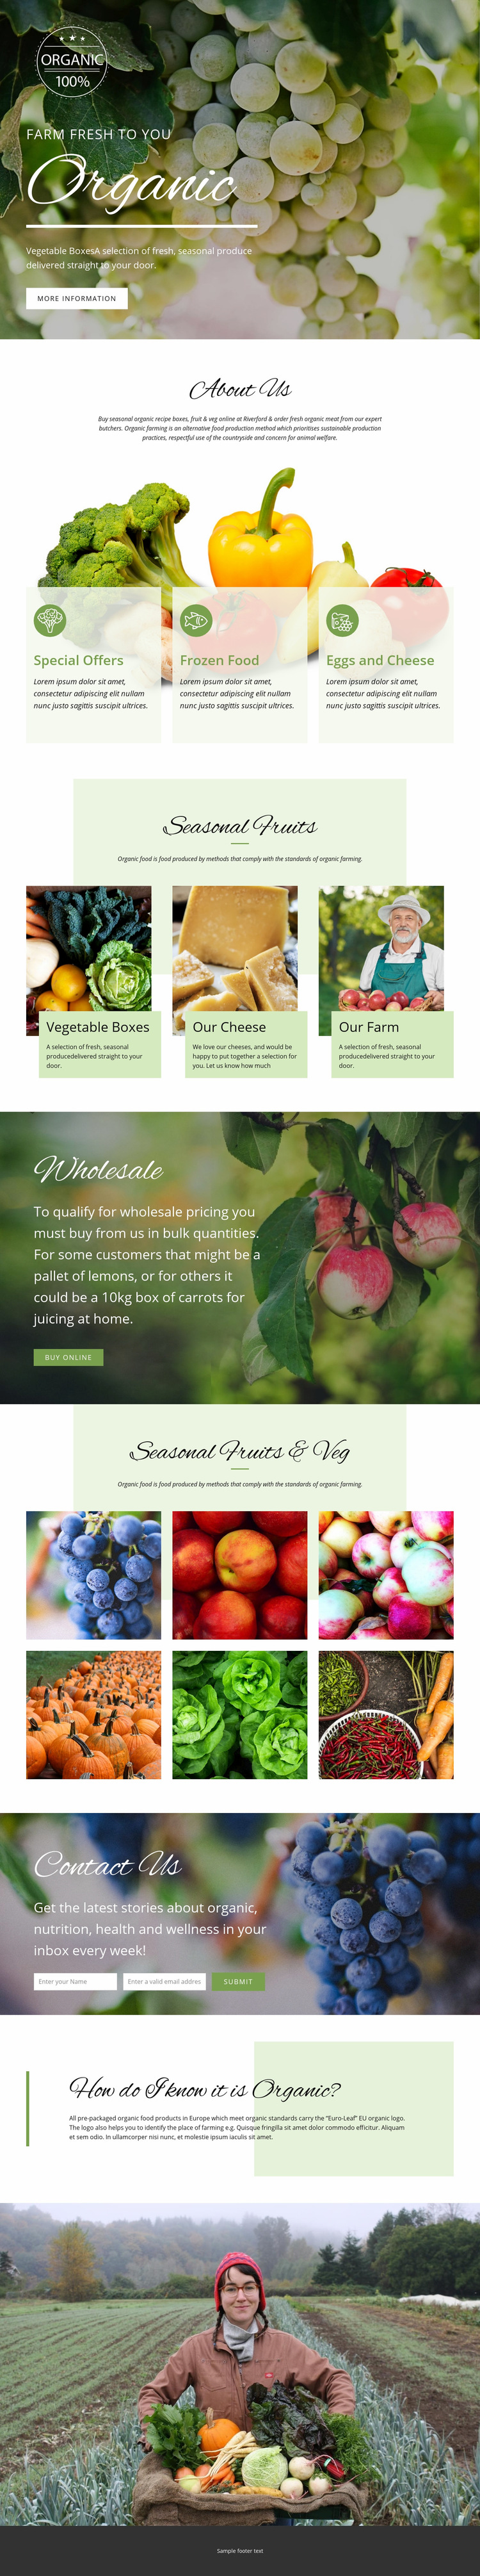 Healthier with organic food Web Page Design